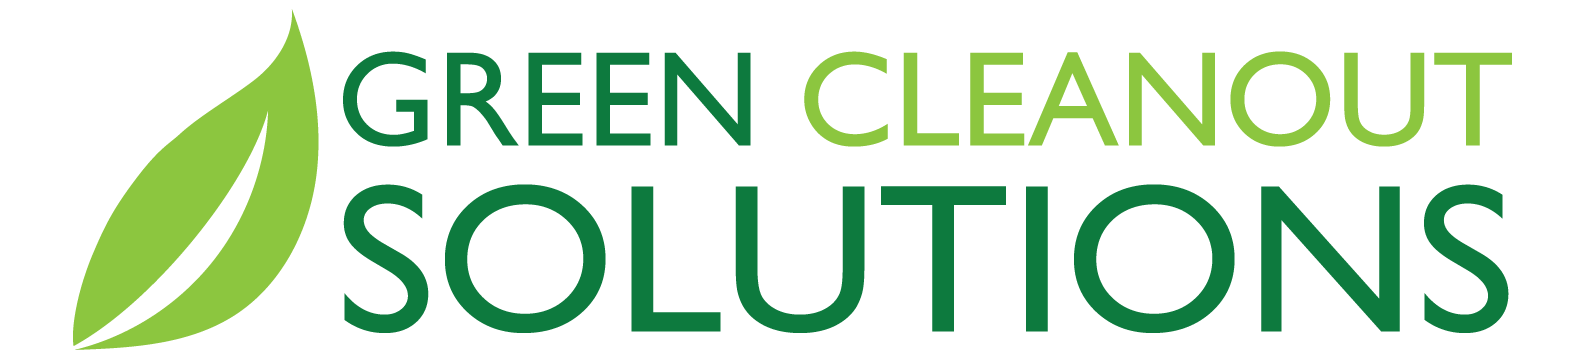 Green Cleanout Solutions